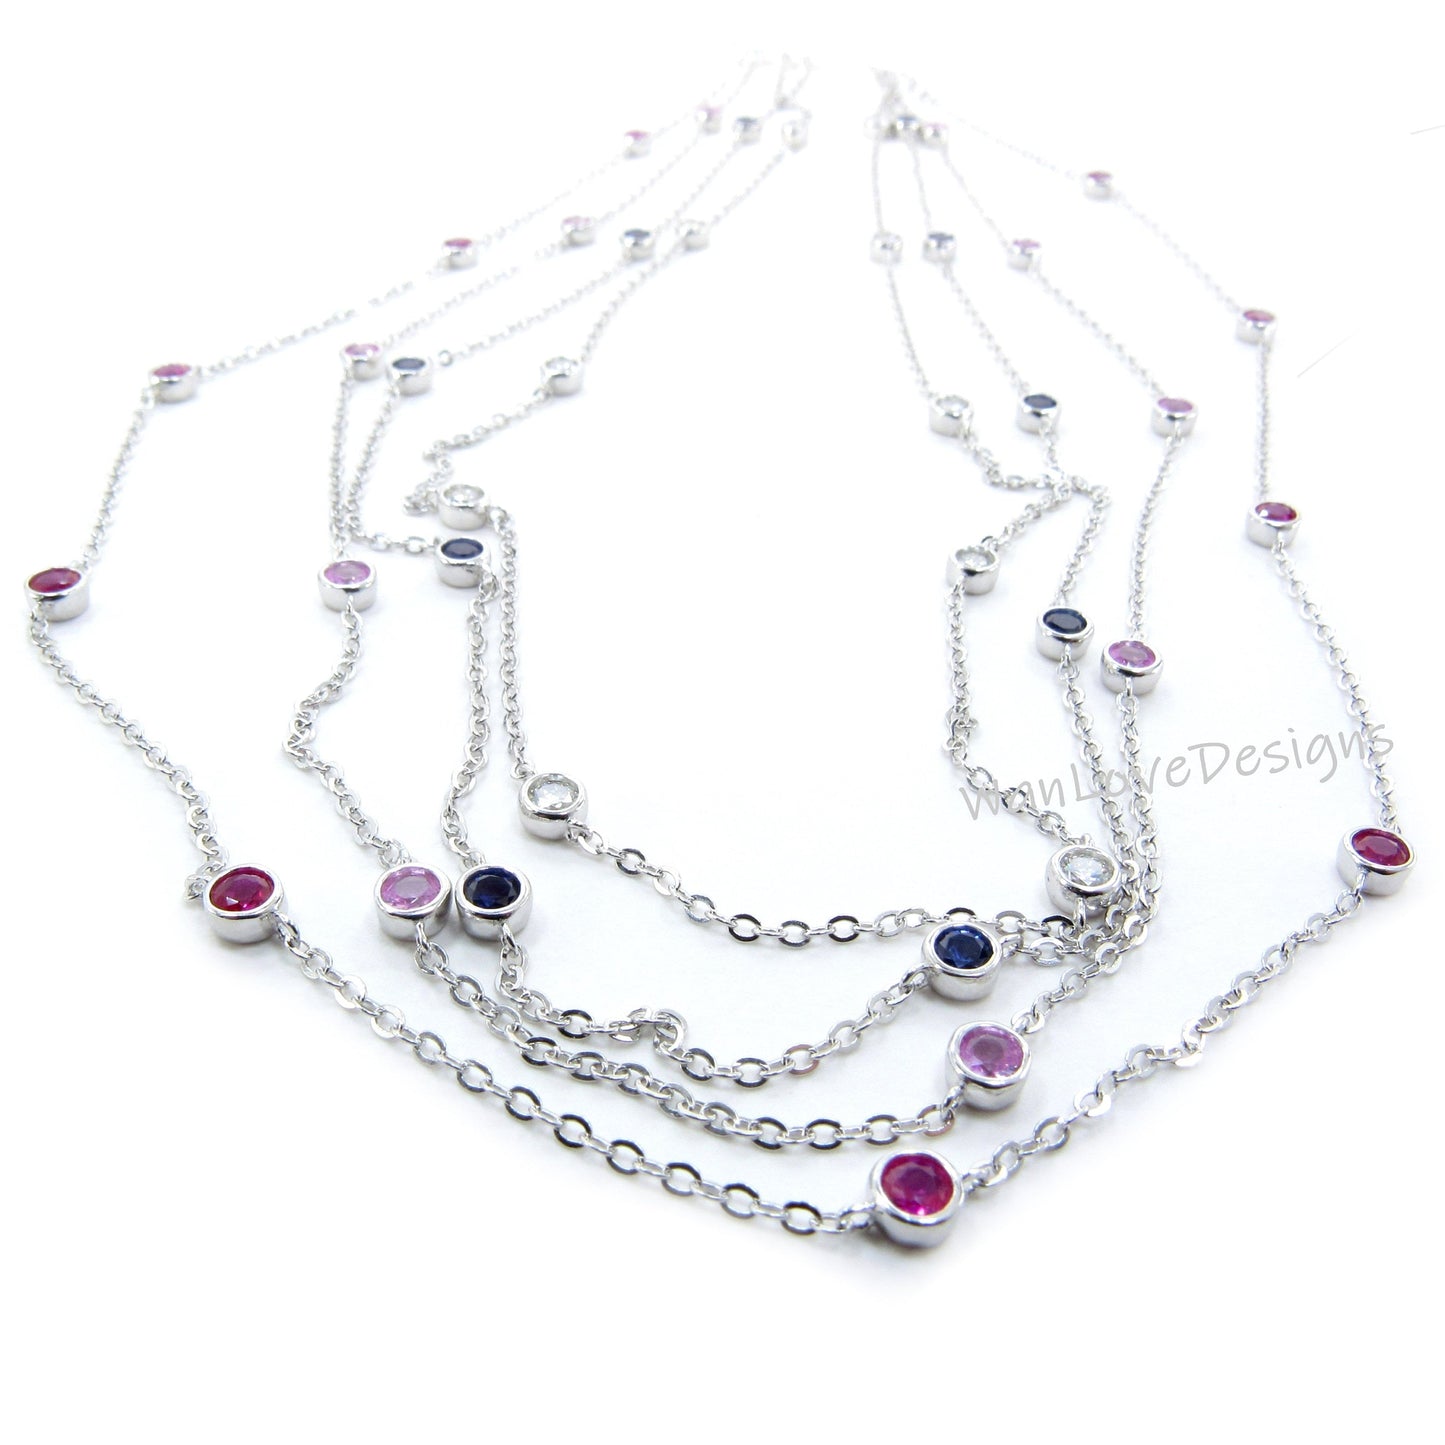 Ready 10 Station Moissanite Ruby Pink or Blue Sapphire Necklace / 1 Carat Diamond By the Yard Necklace / Birthstone Bezel Set Necklace /Gift Wan Love Designs